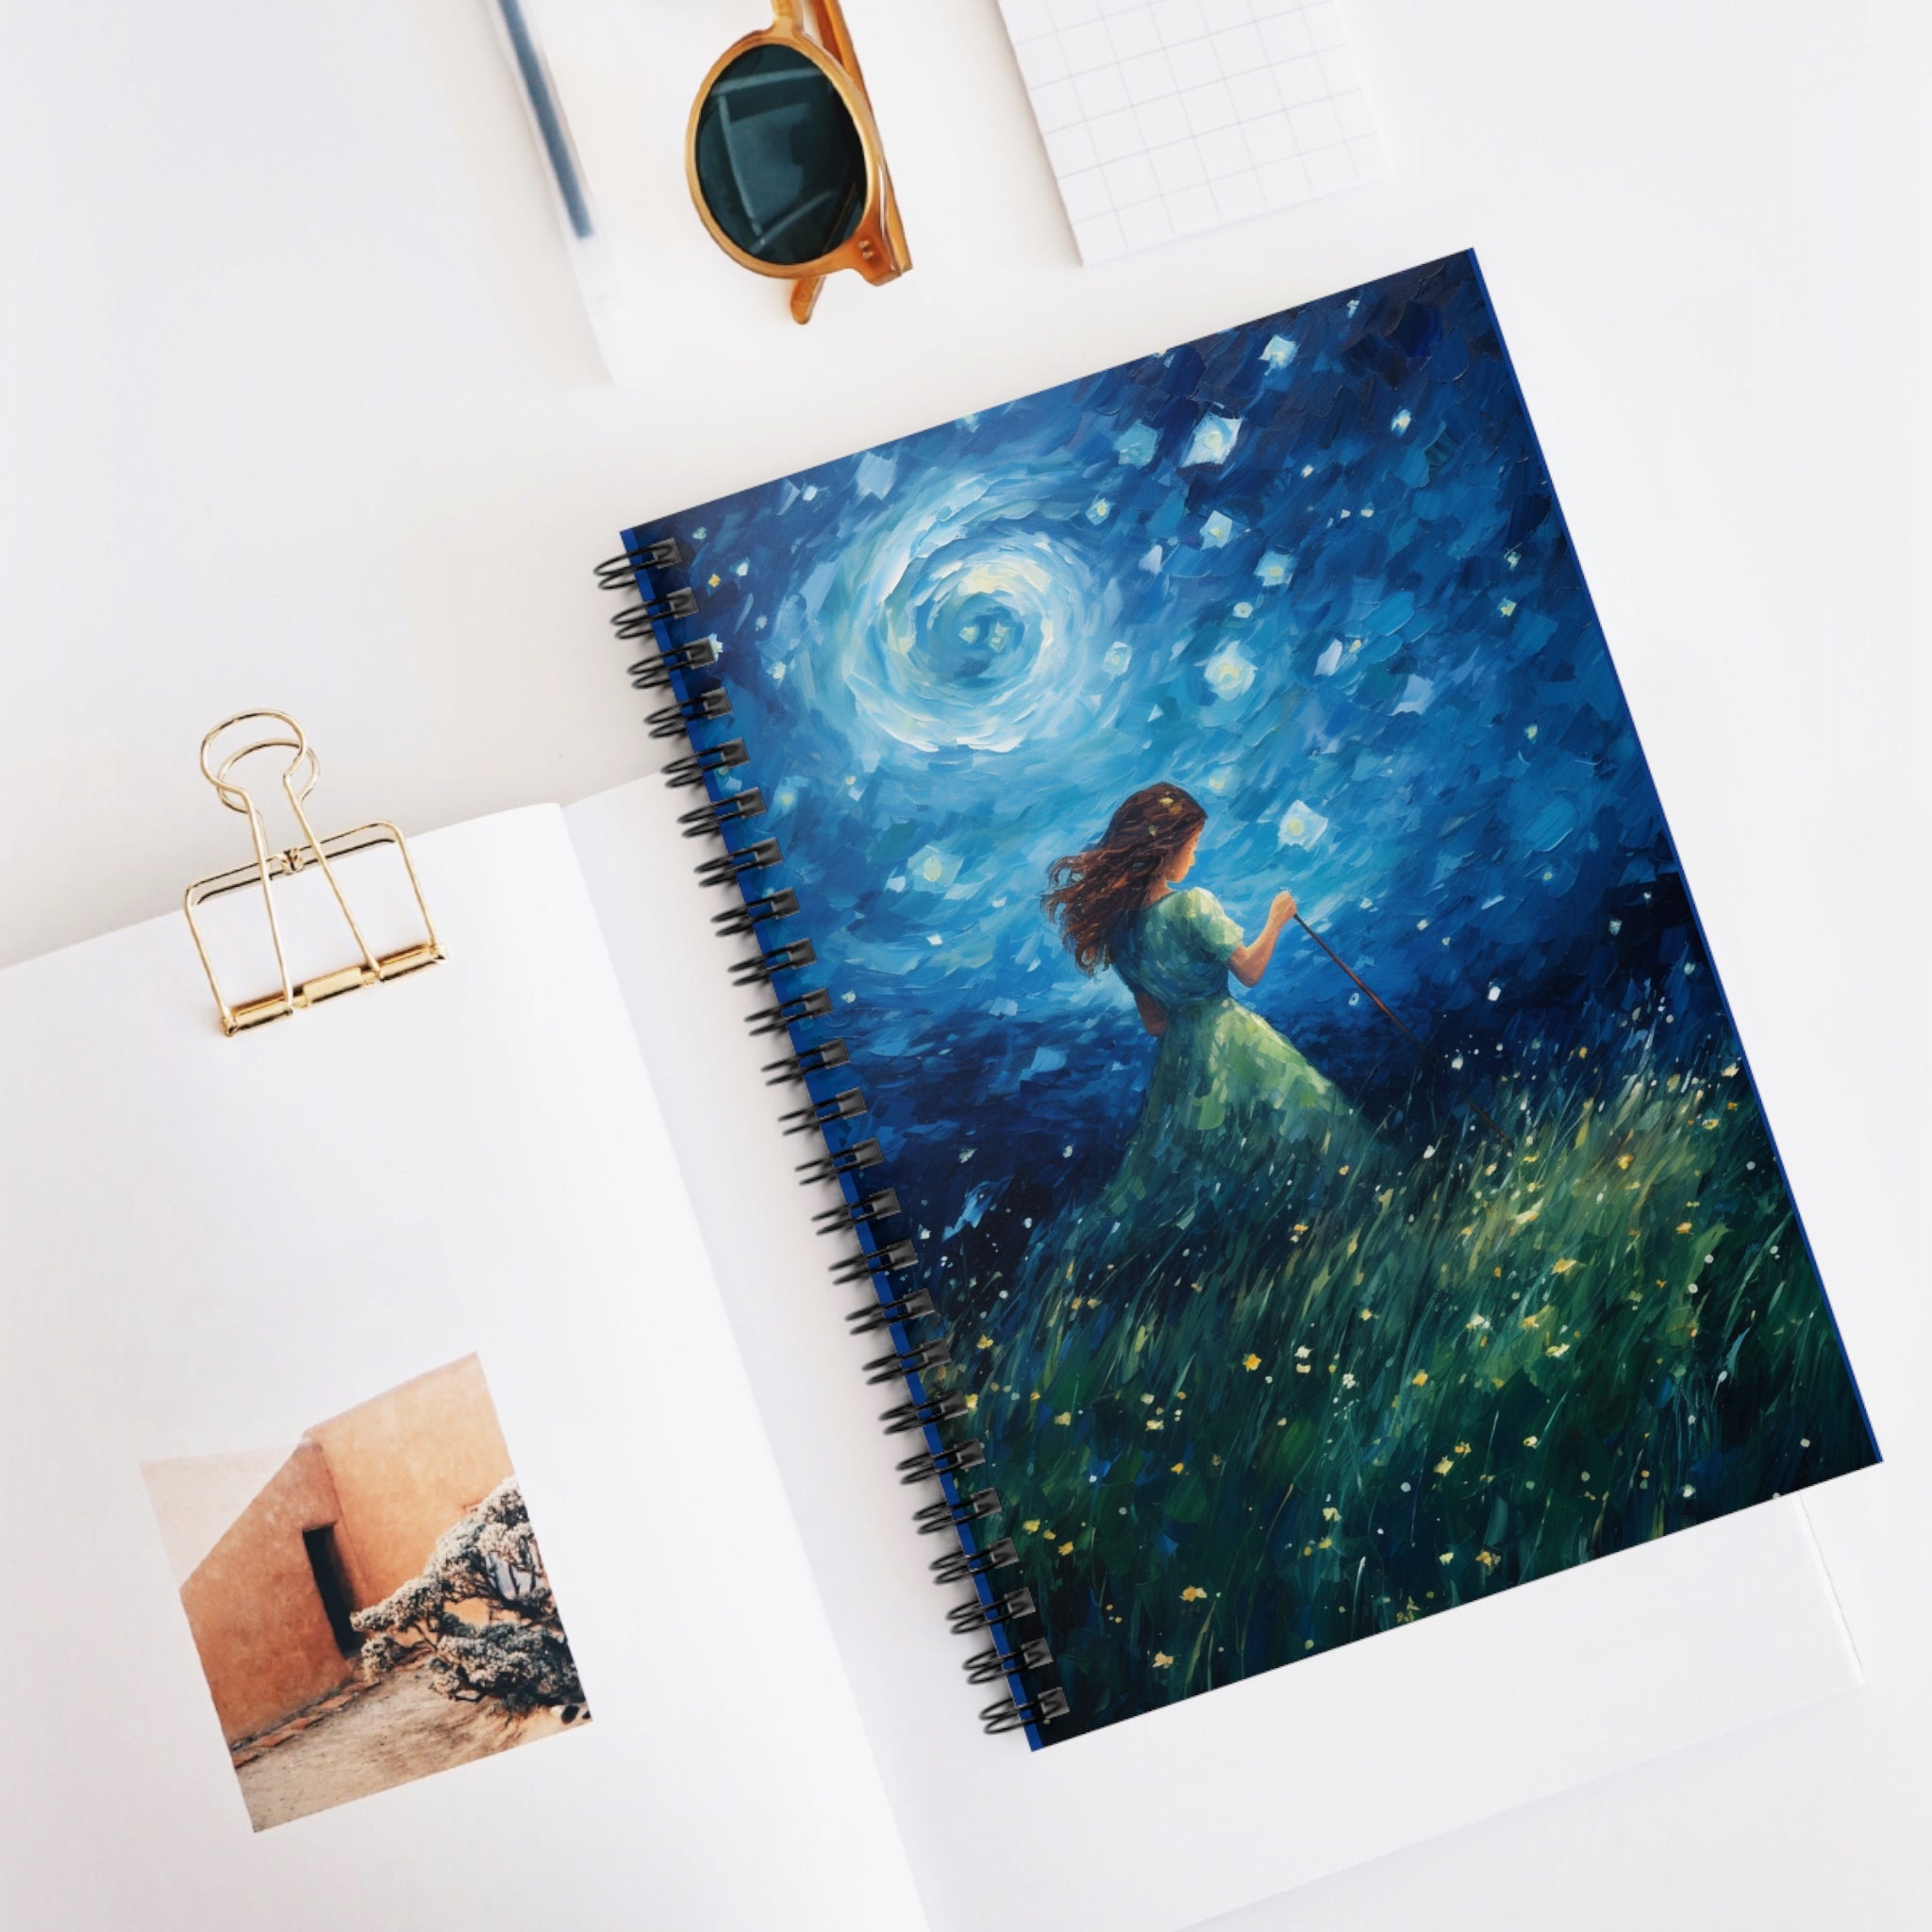 Starry Skies - Spiral Notebook - Ruled Line - Spruced Roost